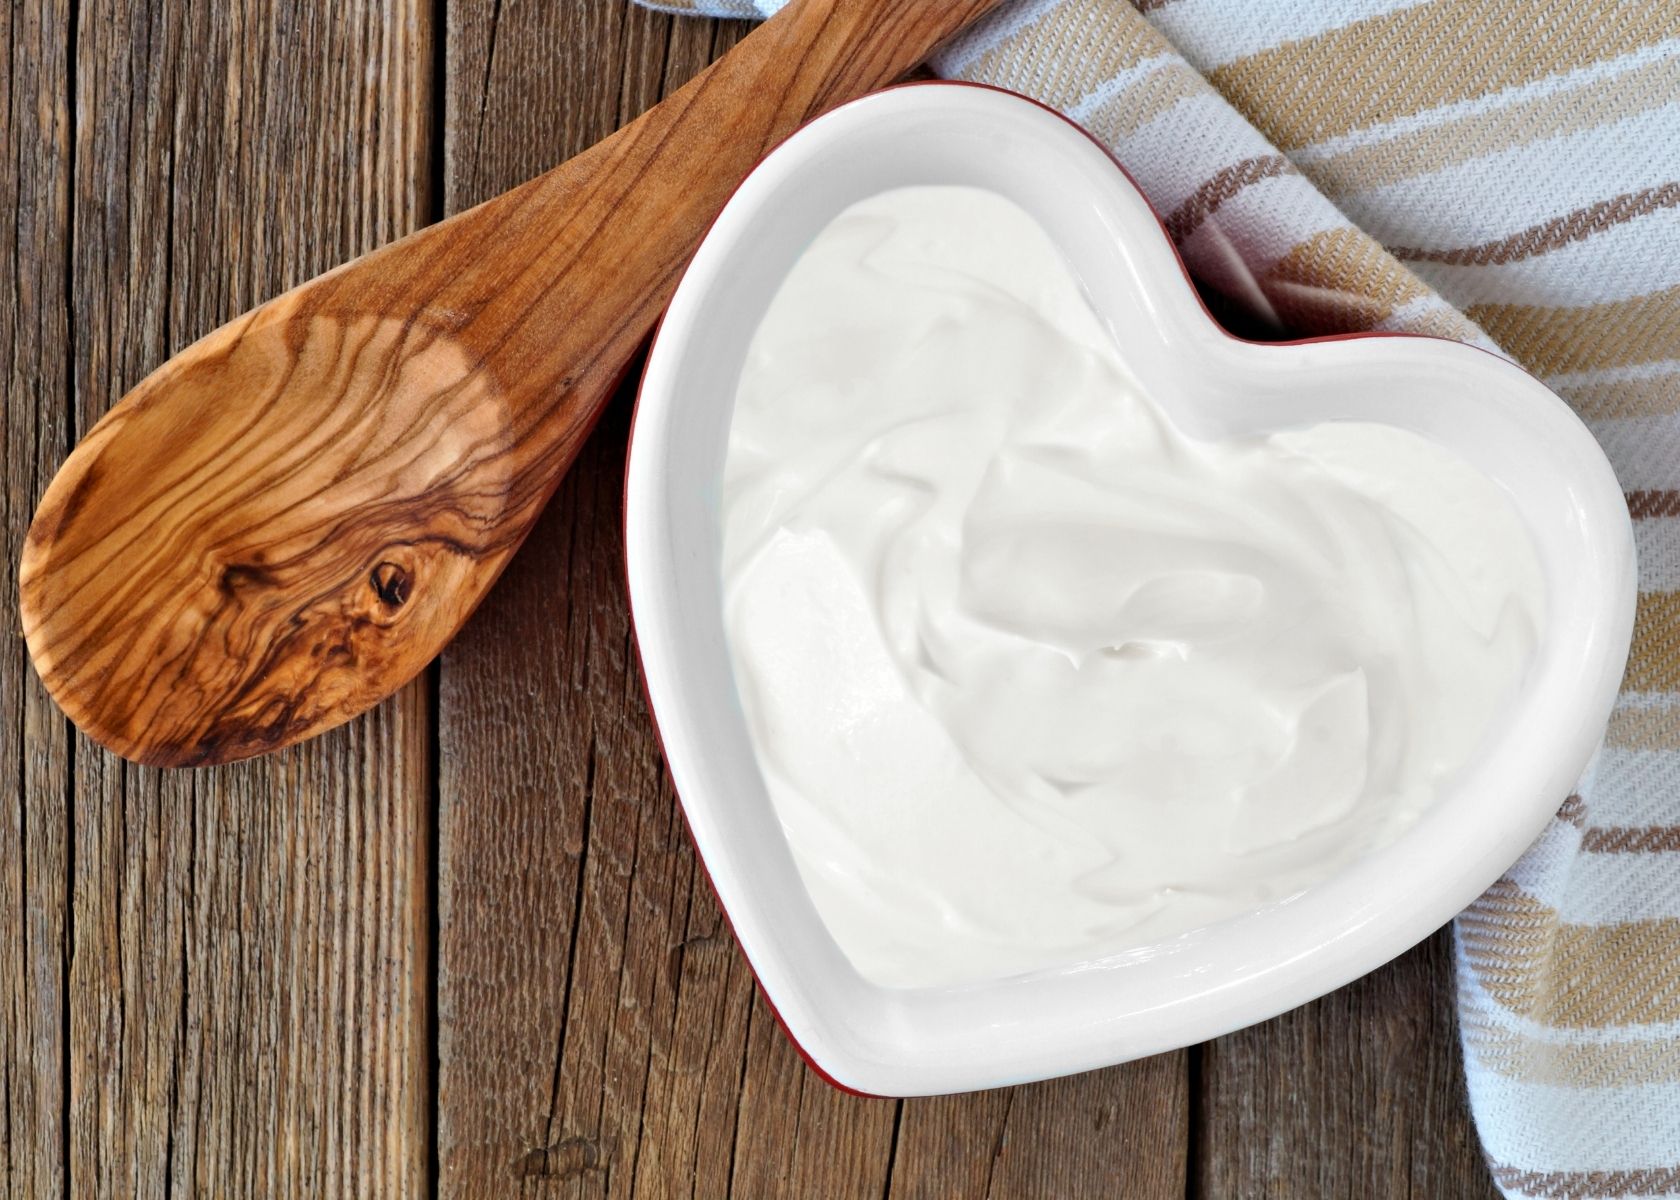 Greek yogurt in white heart-shaped bowl next to wooden spoon and kitchen towel.